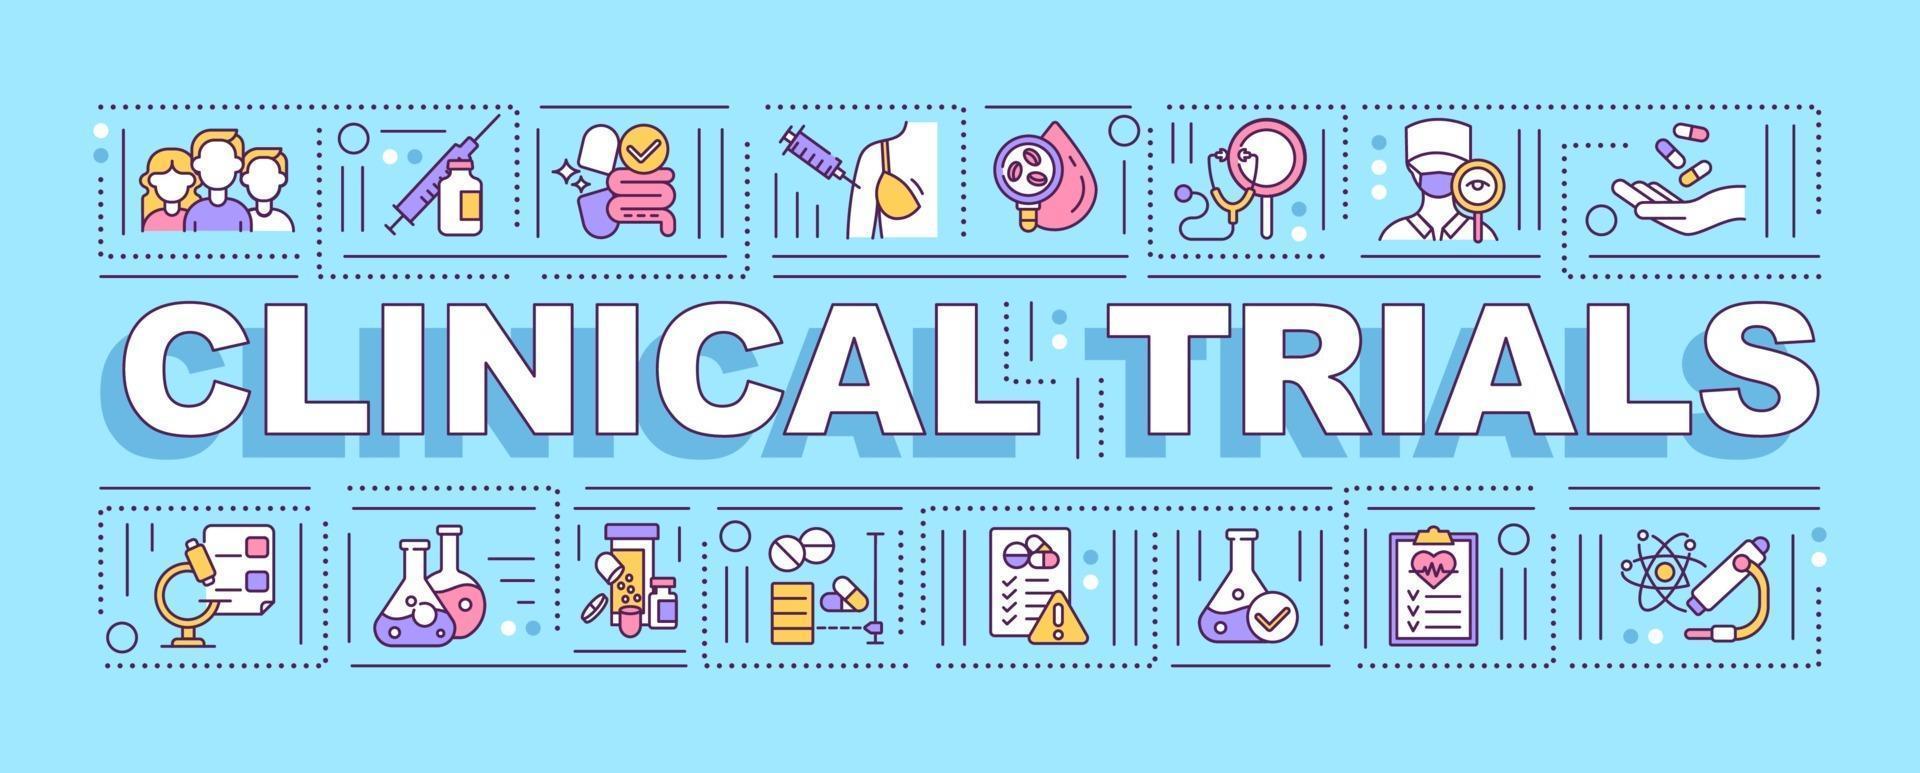 Clinical trials word concepts banner vector